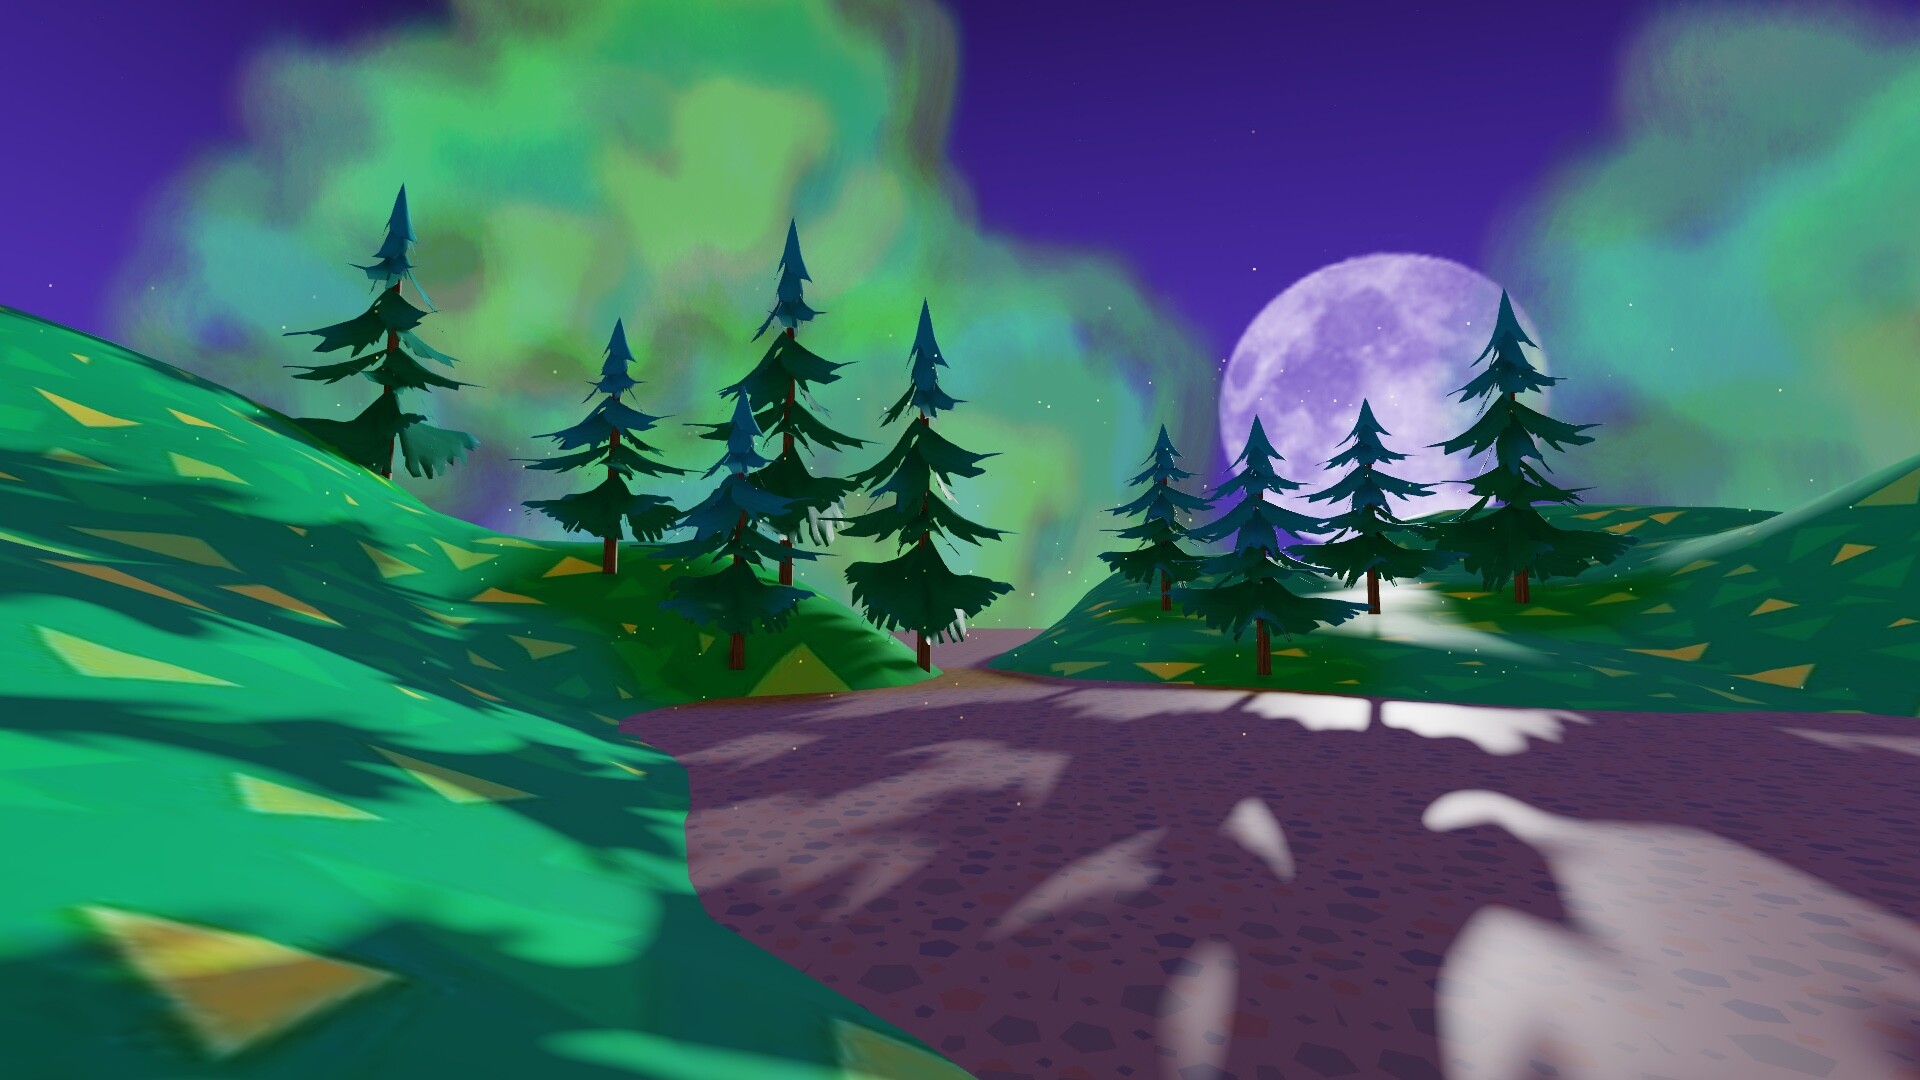 Game icon of two roblox avatars in a moonlit forest